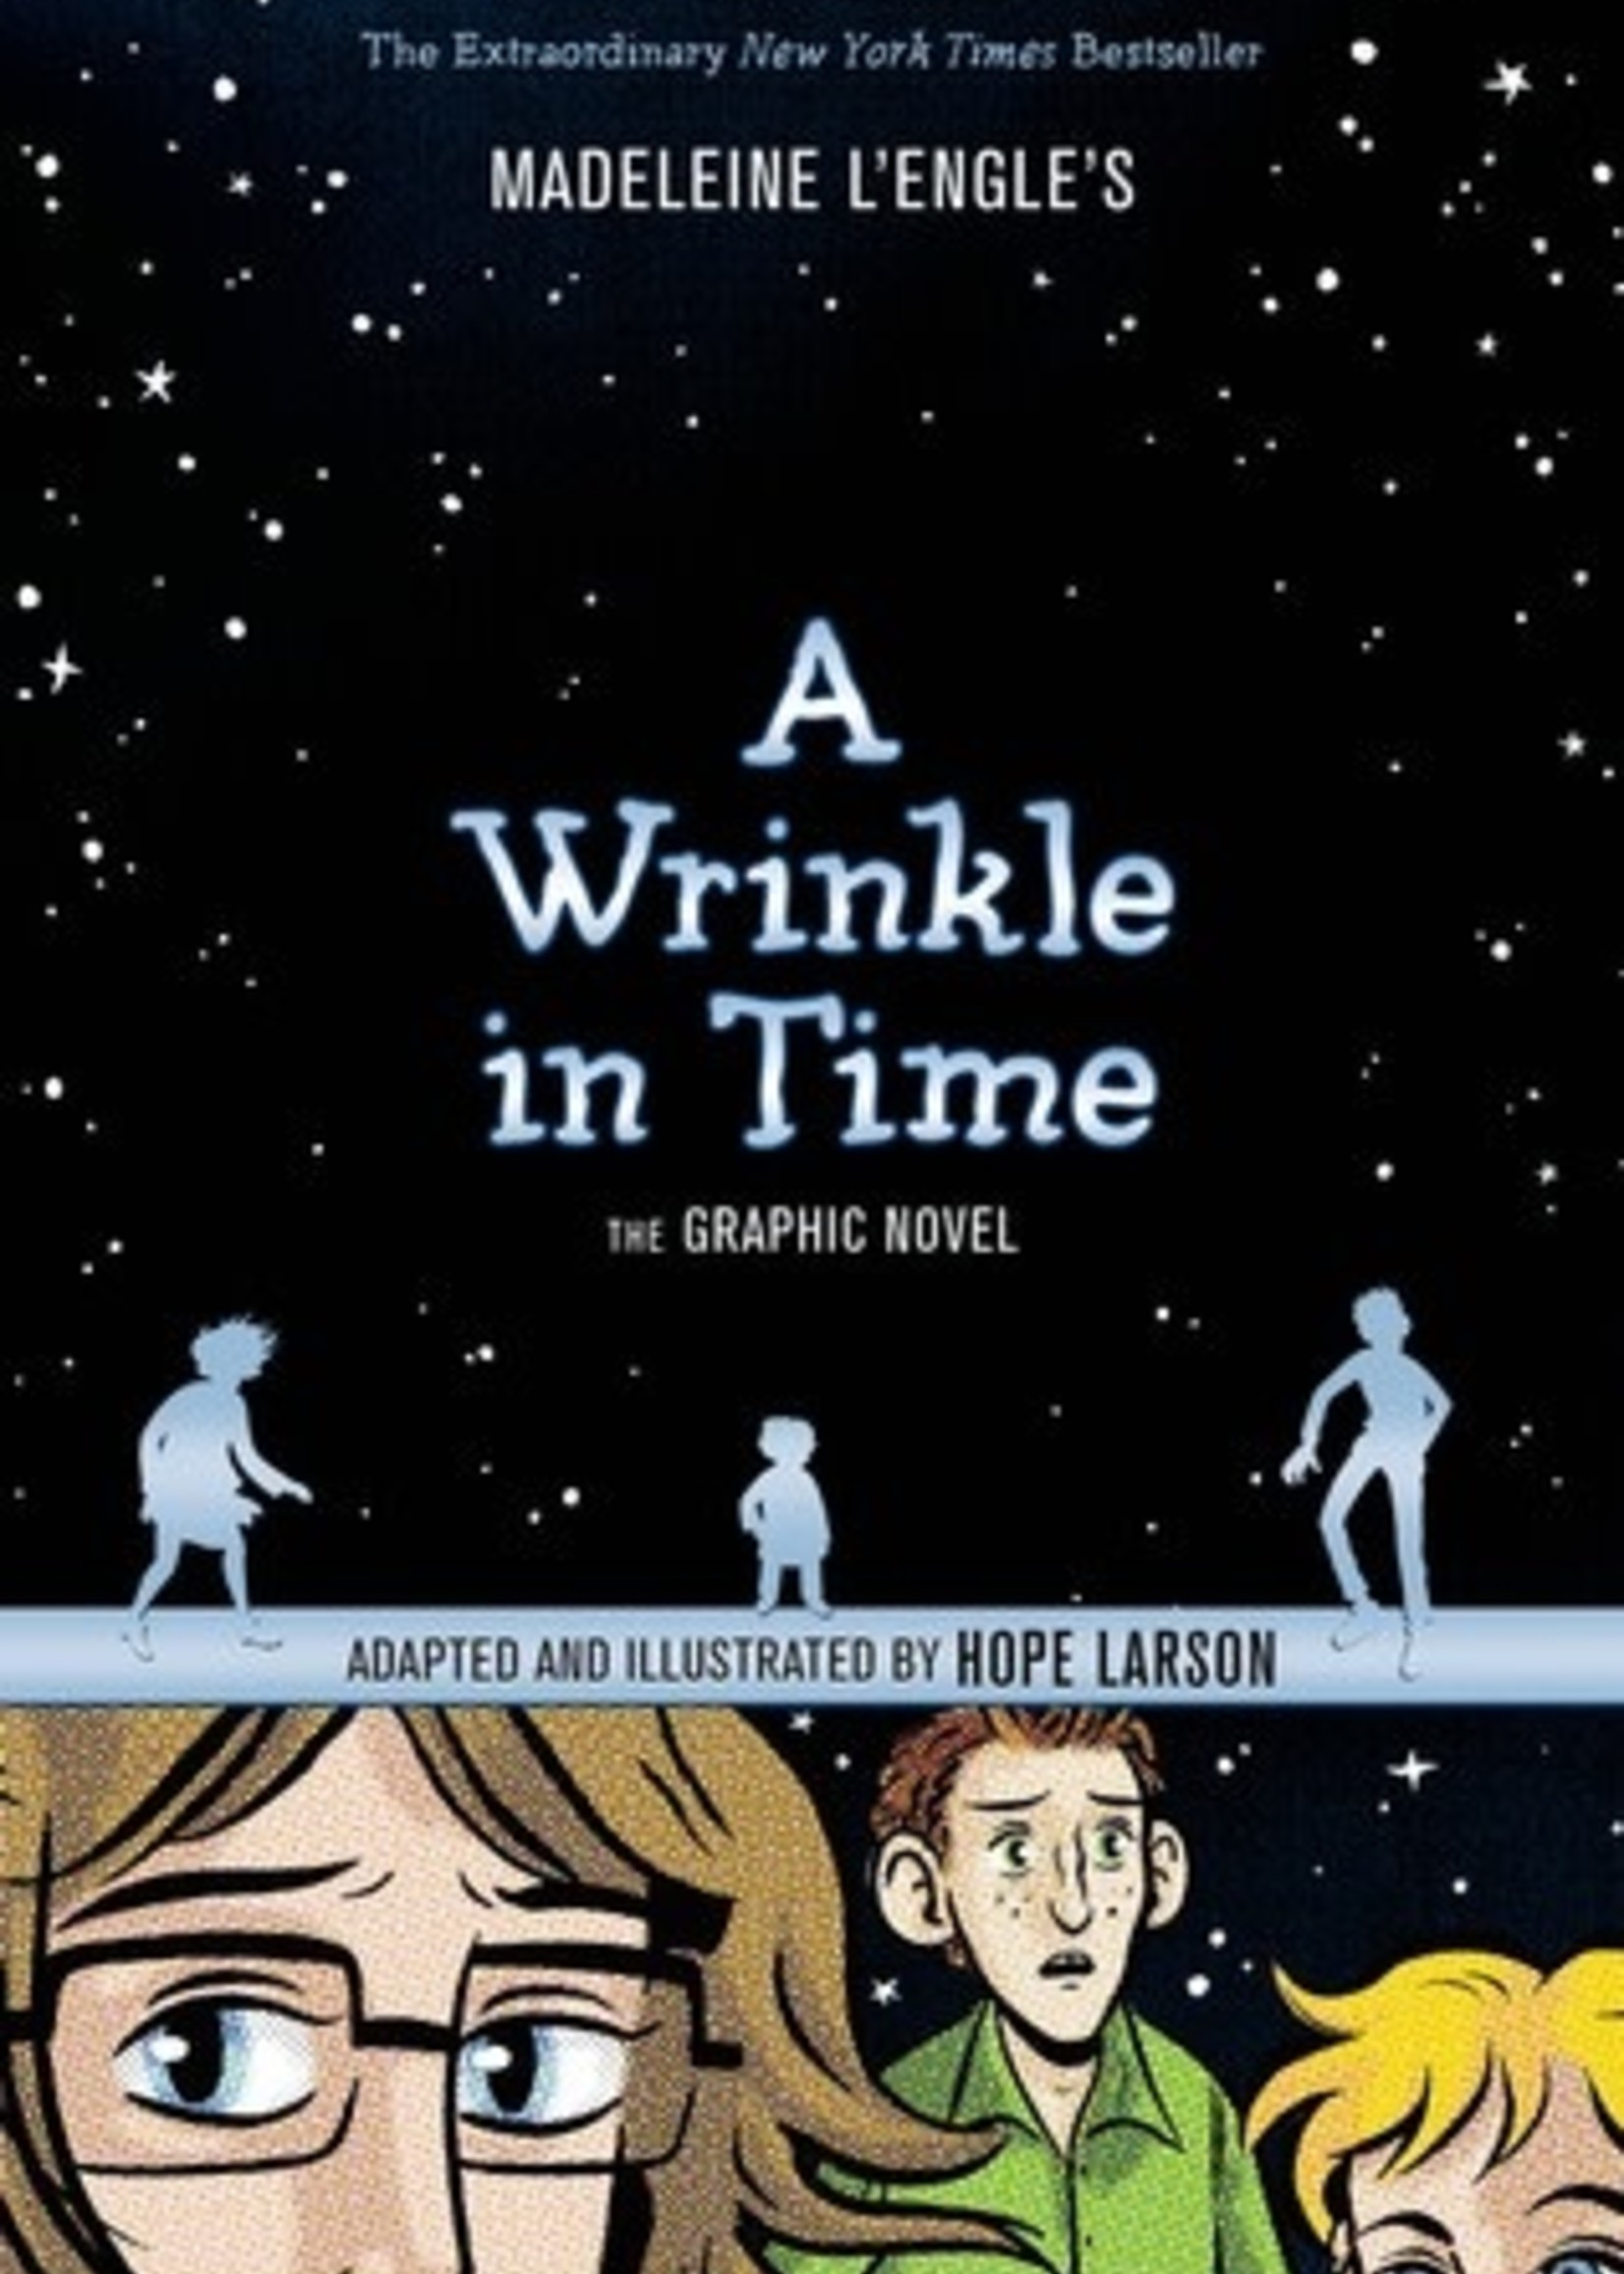 A Wrinkle in Time: The Graphic Novel by Hope Larson,  Madeleine L'Engle